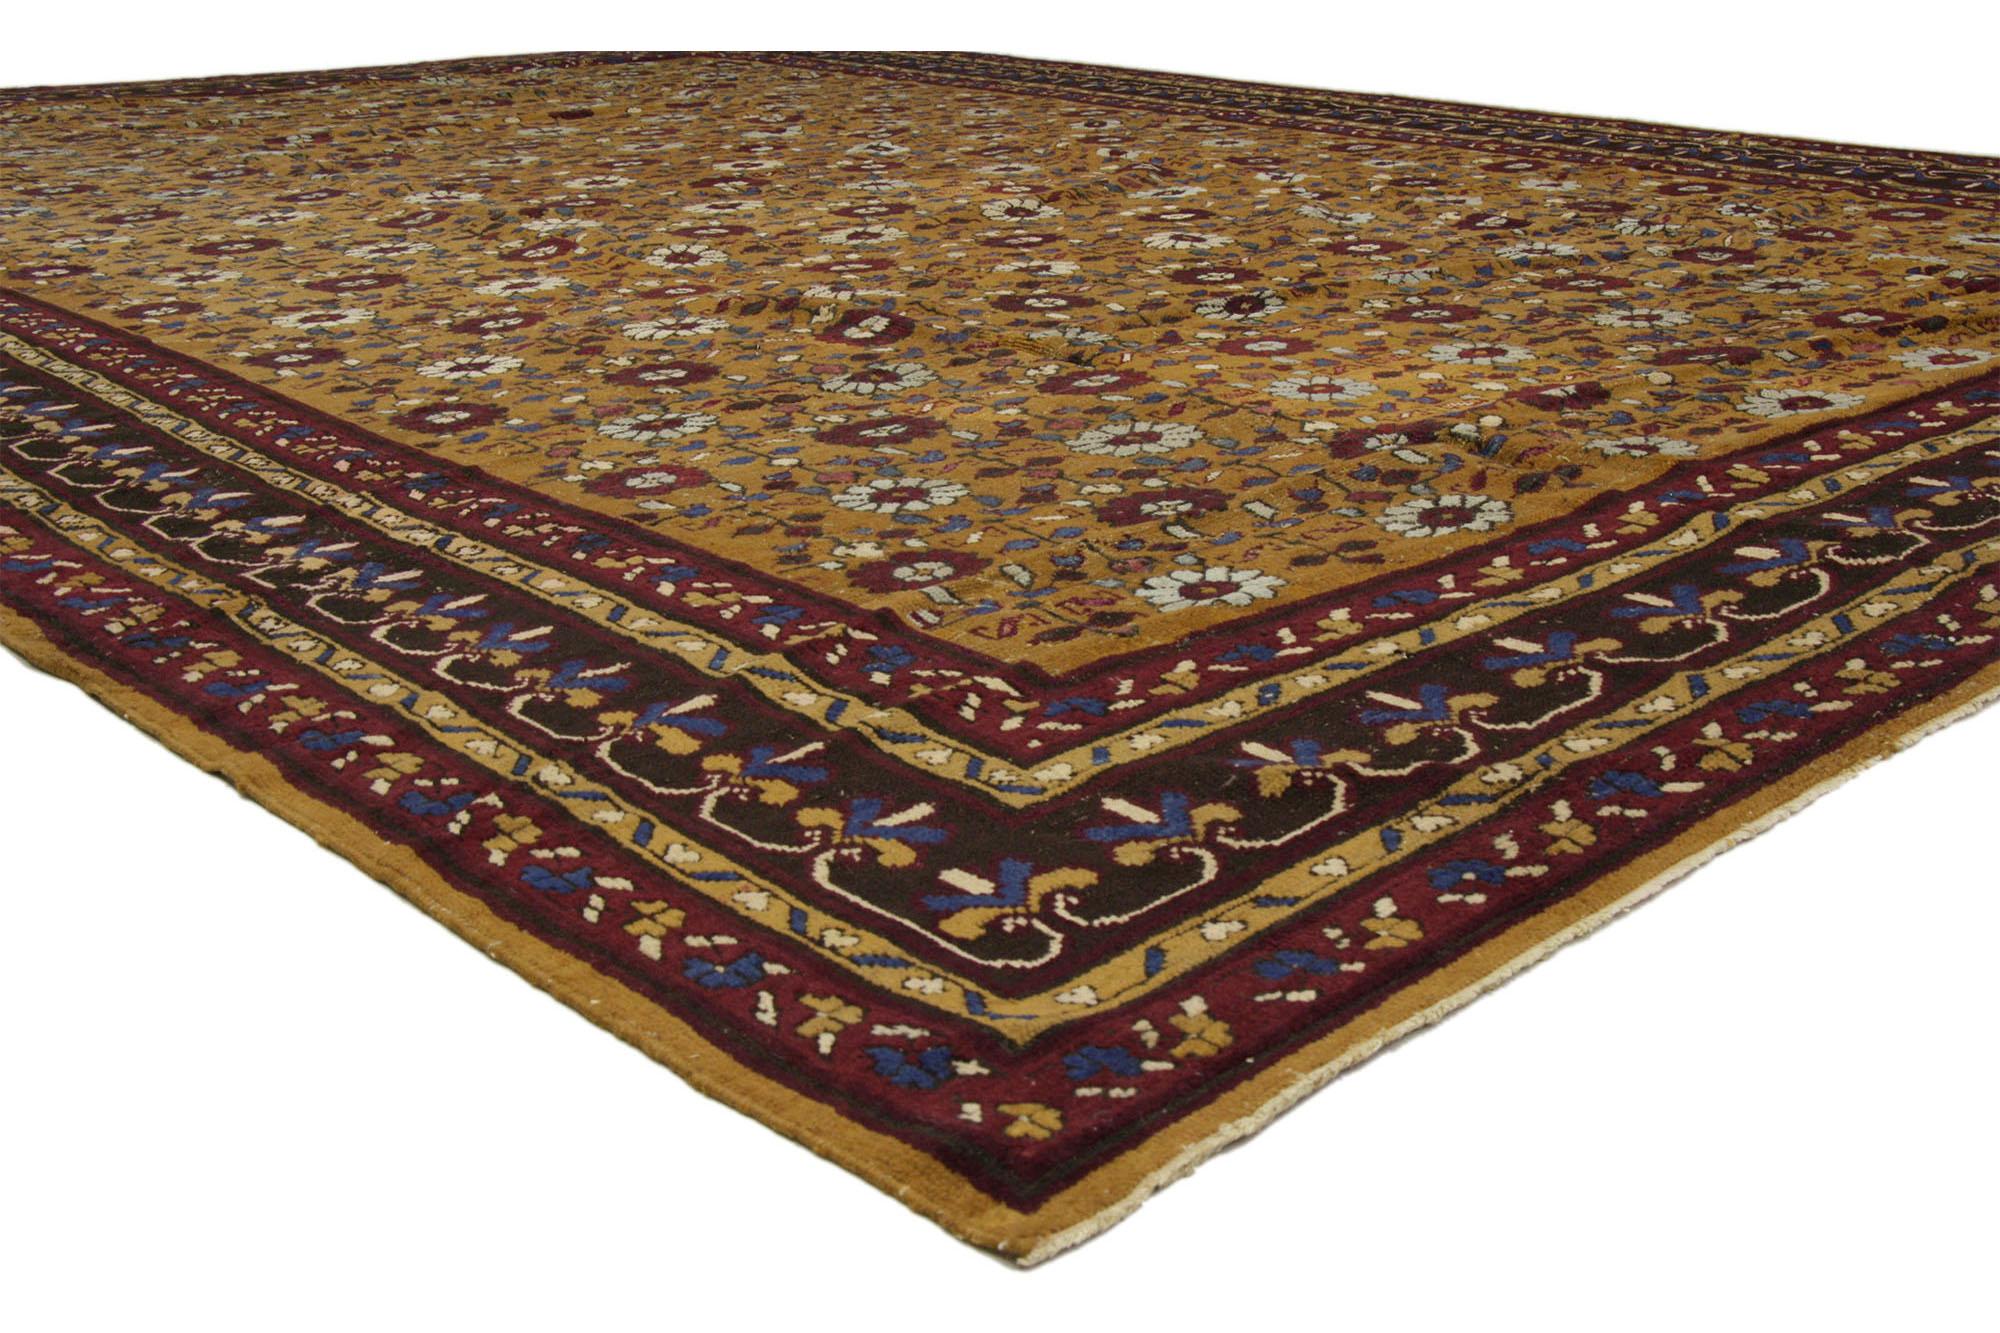 76592 Late 19th Century Antique Indian Agra Rug, 12'00 x 16'09. Indian Agra rugs are hand-knotted carpets originating from Agra, Uttar Pradesh, India, known for their intricate floral motifs, geometric patterns, and elaborate borders inspired by